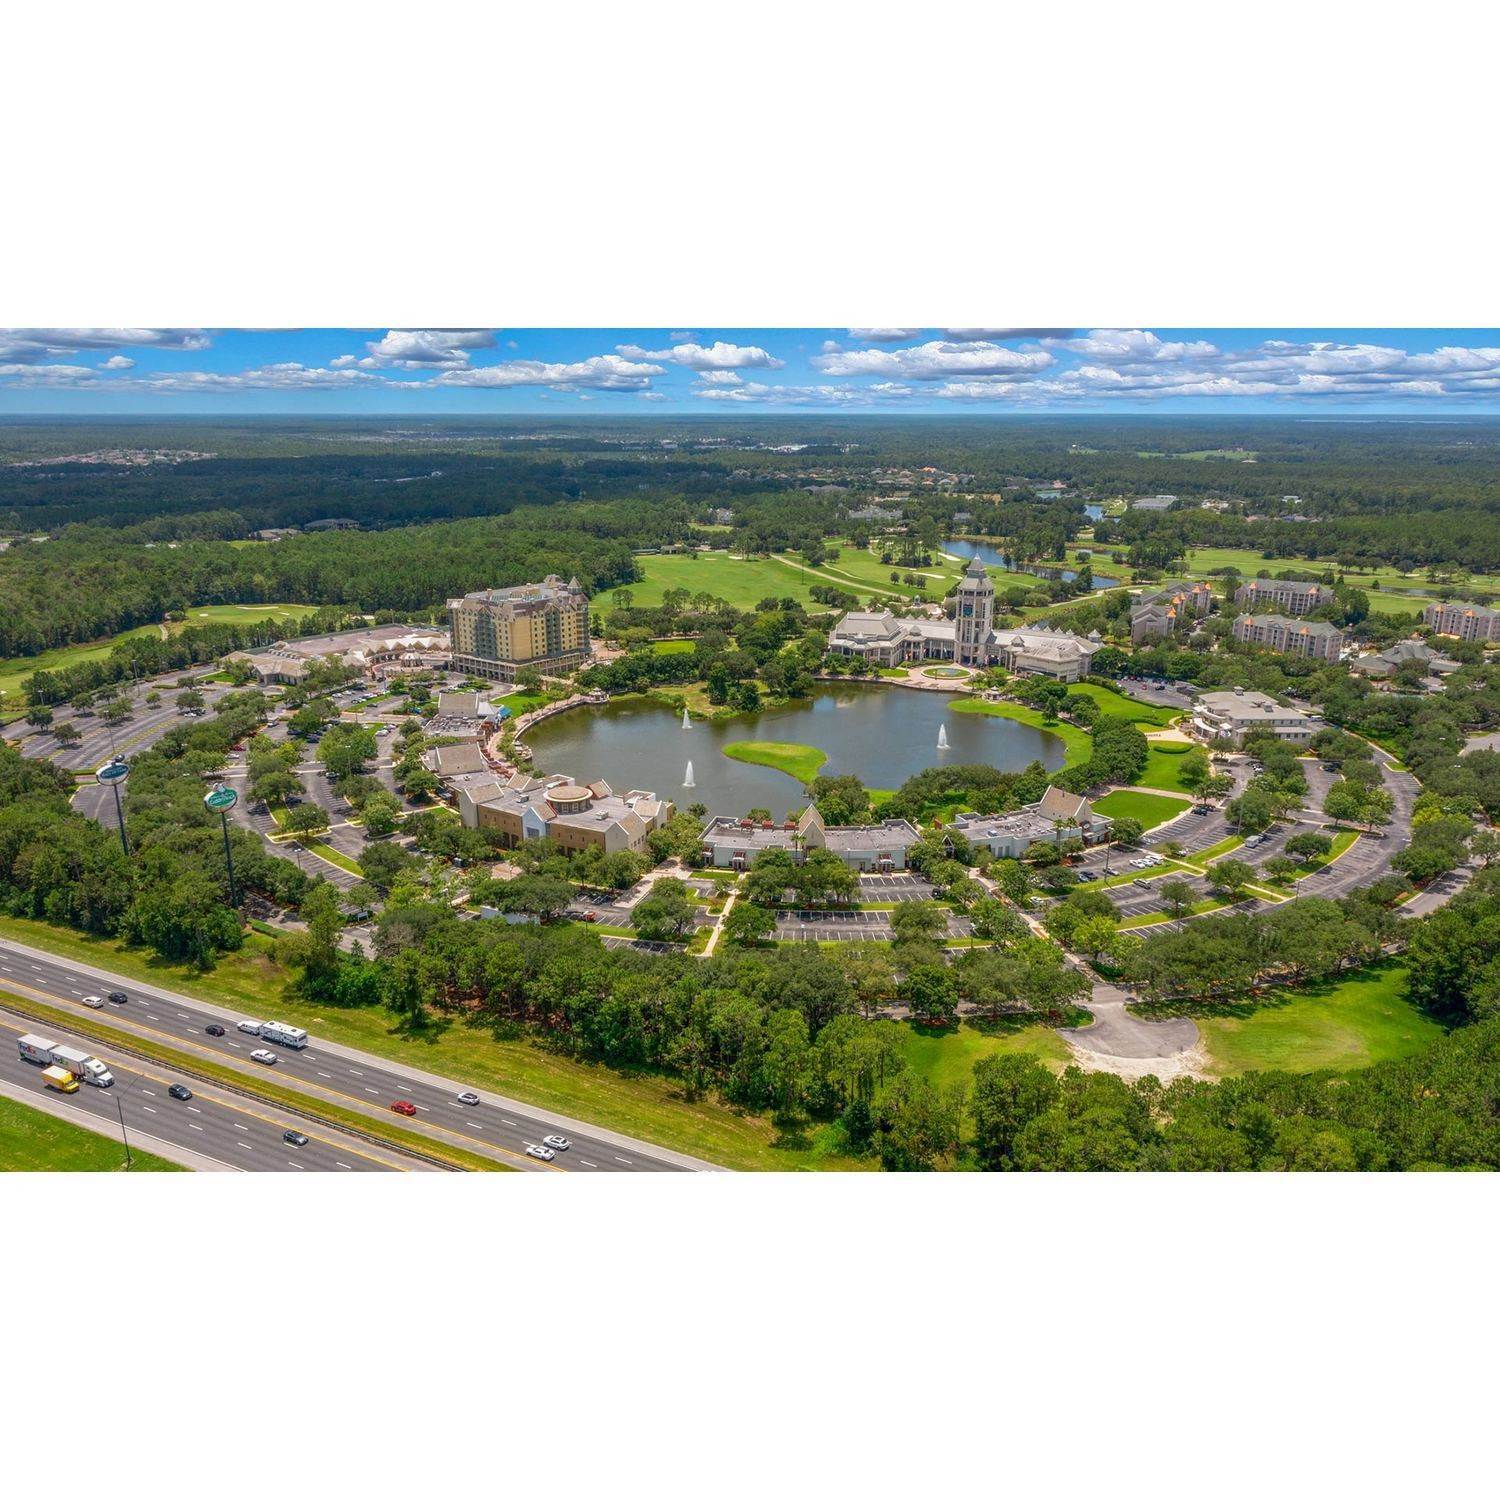 28. Whispering Creek xây dựng tại 70 Whispering Brook Dr., St. Augustine, FL 32084